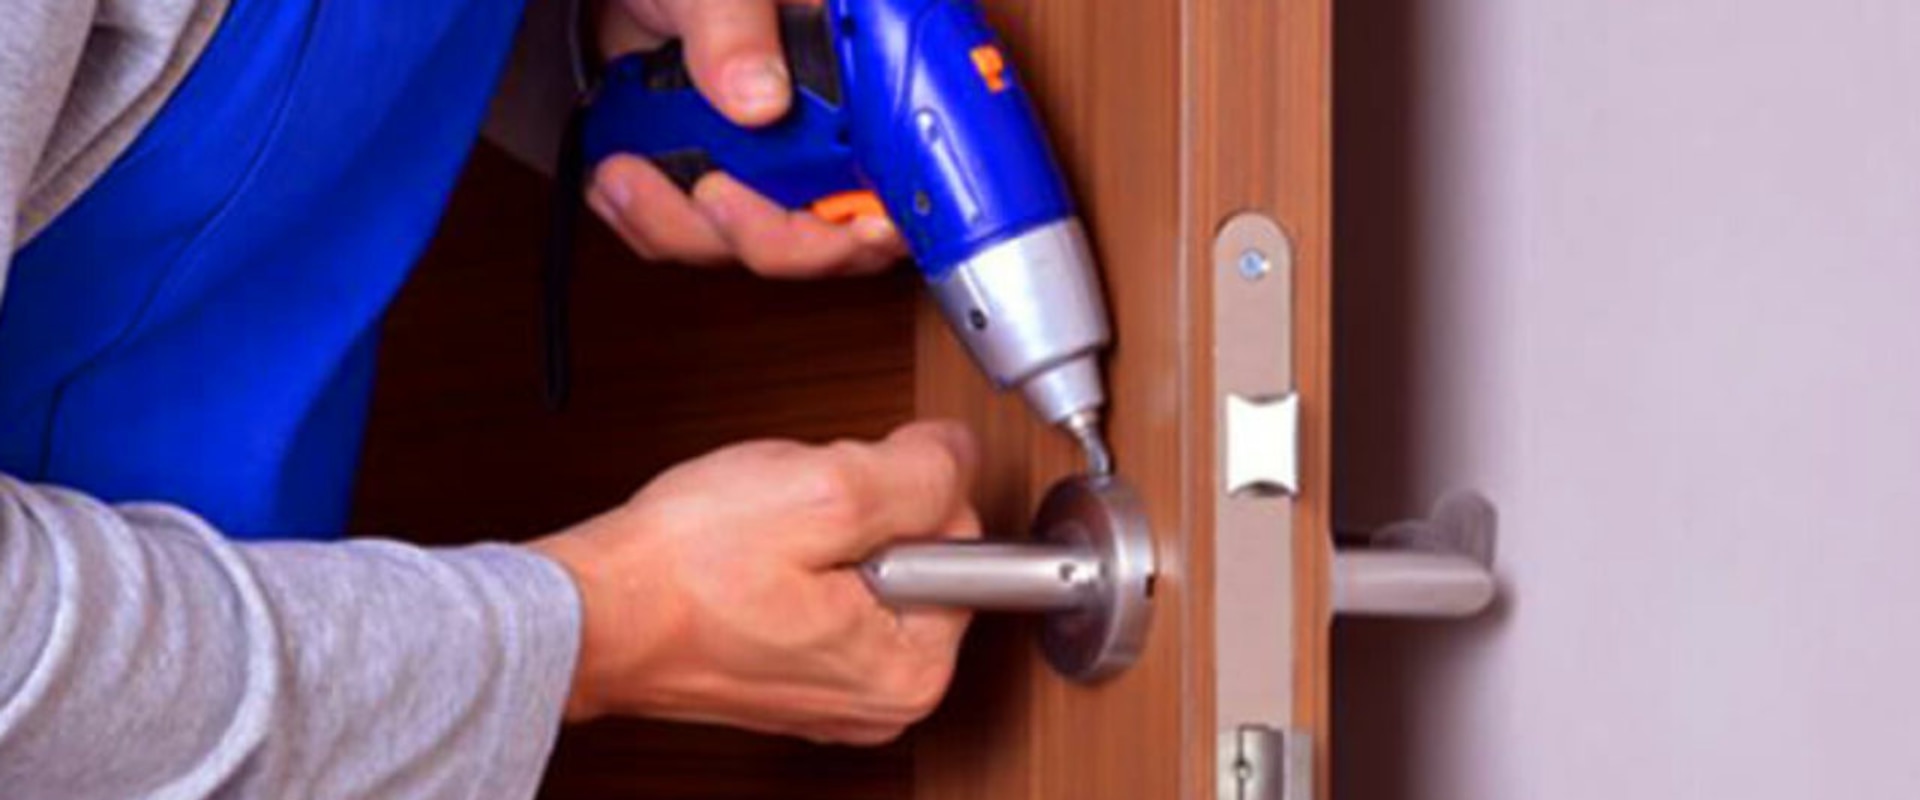 How To Upgrade Your Home Security With Professional Locksmith Services During A Remodel In Virginia Beach